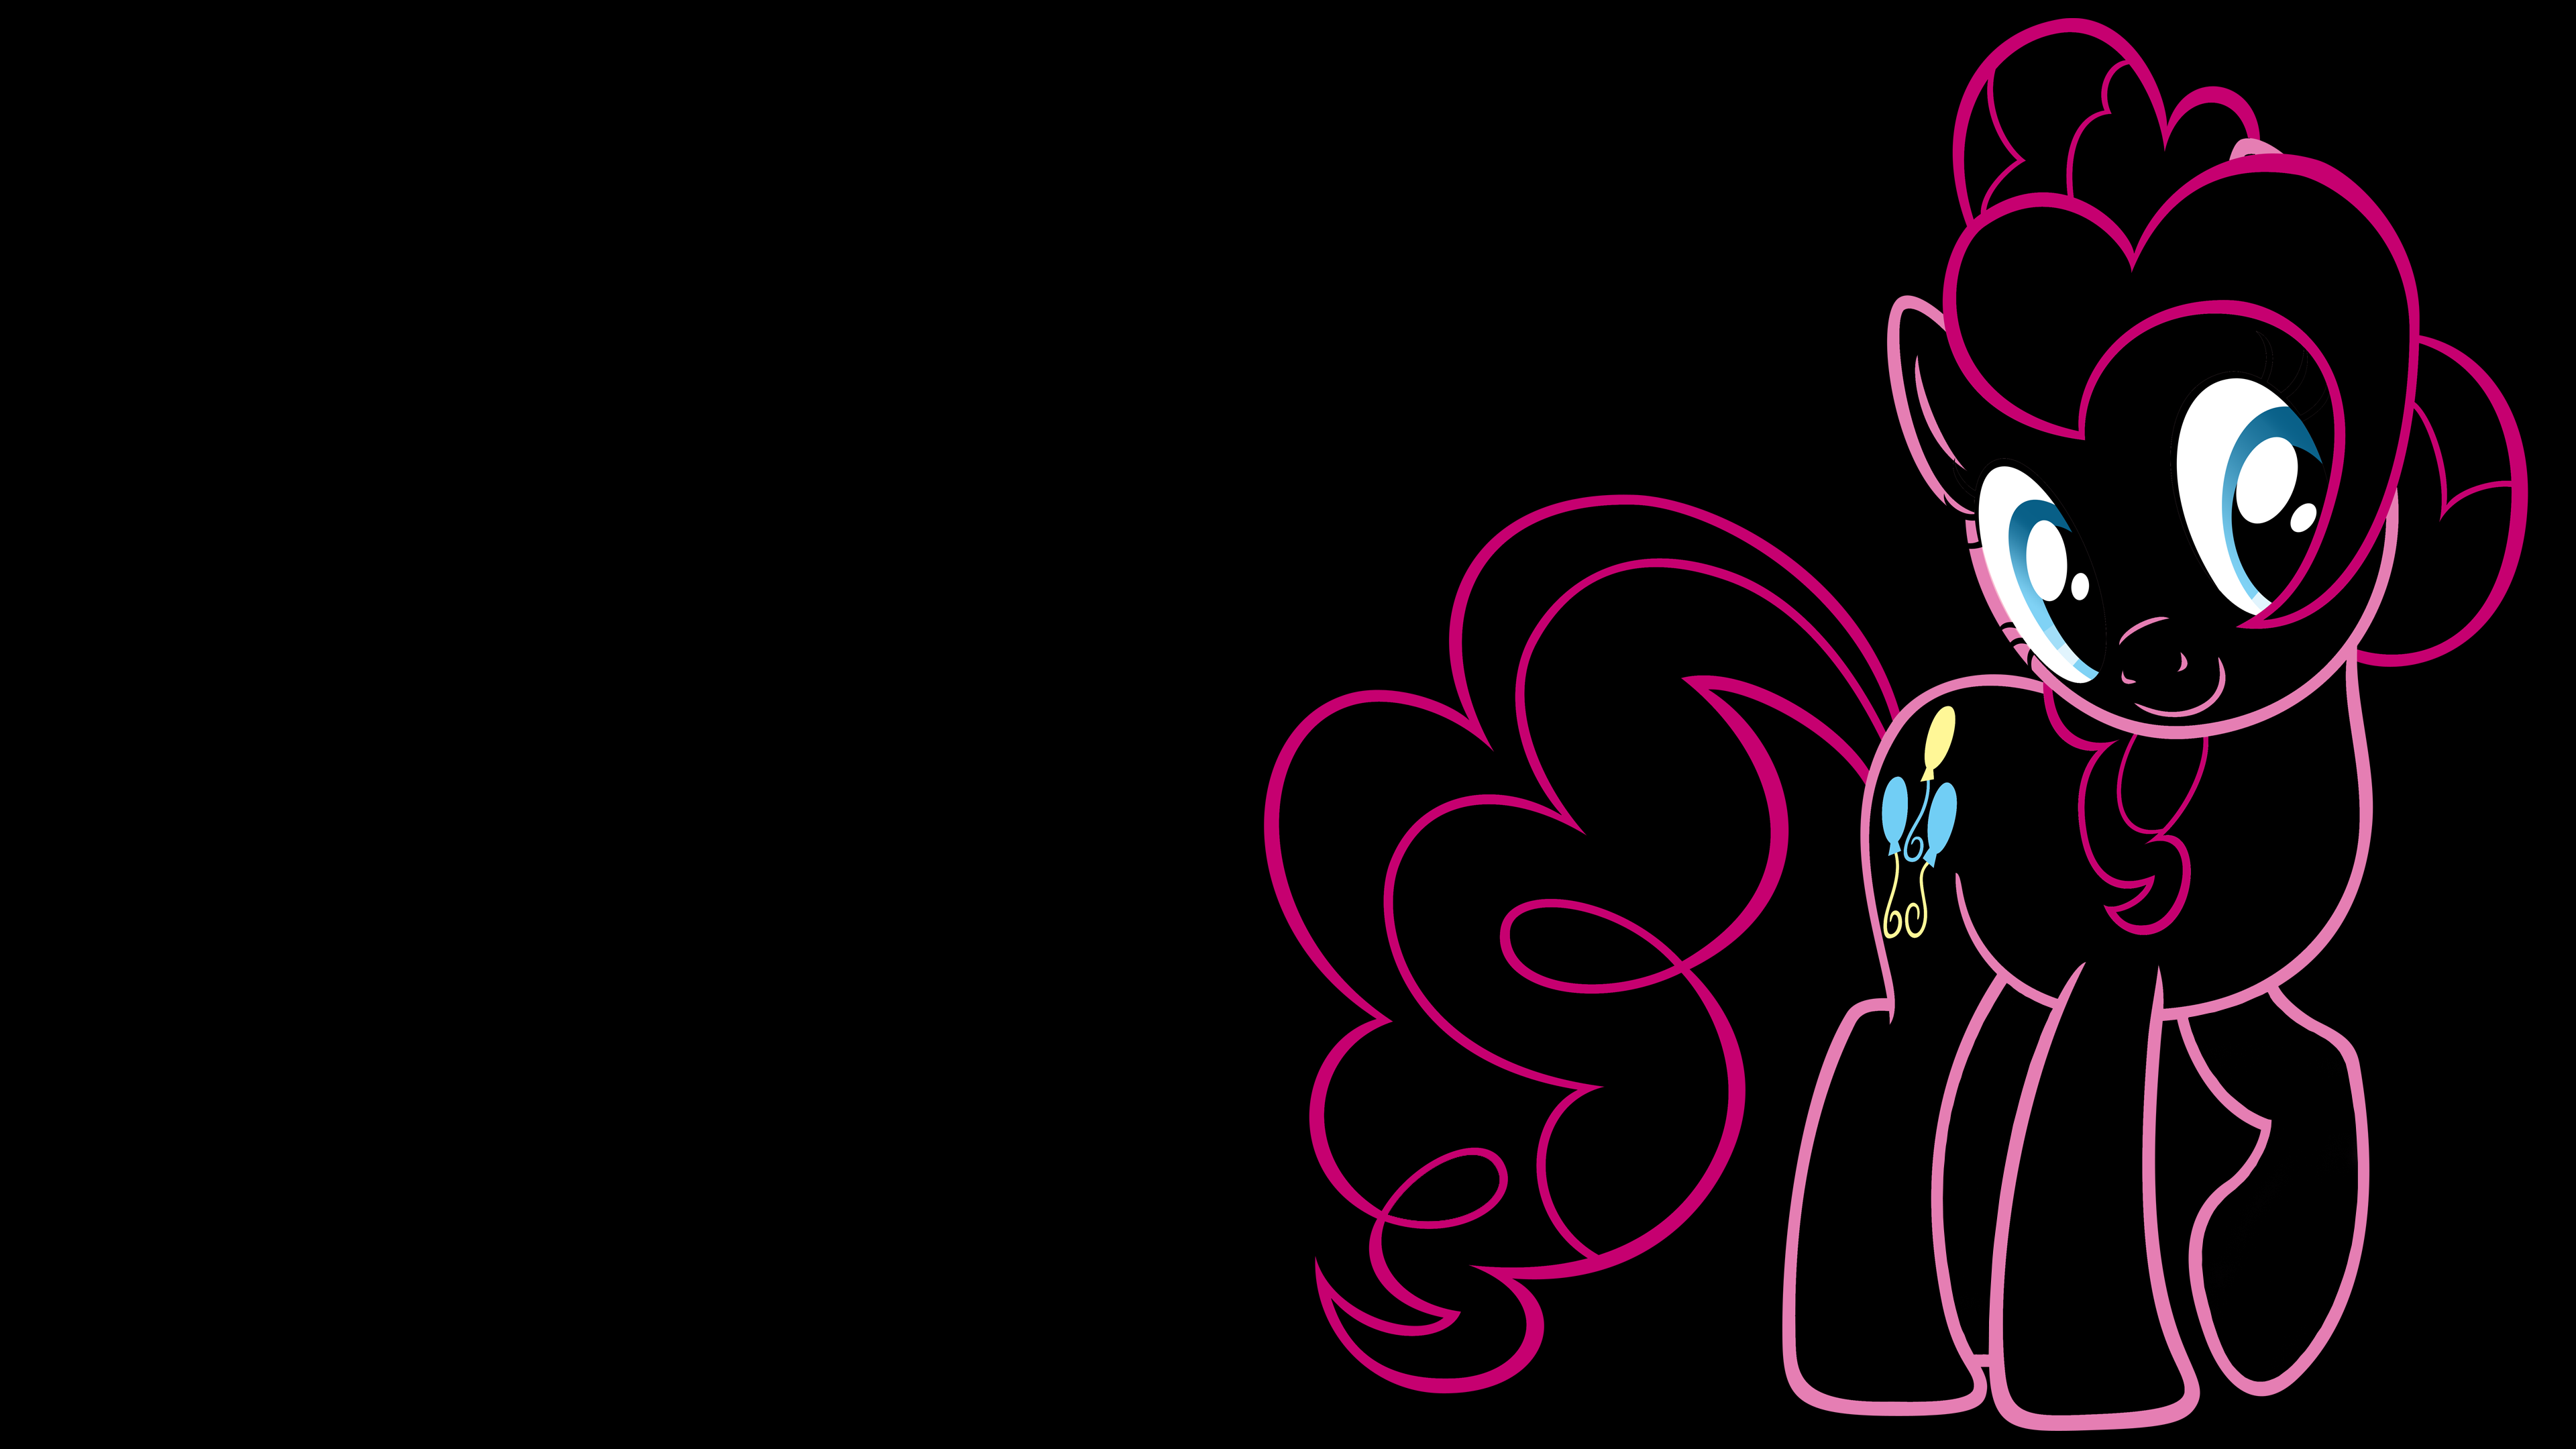 Pinkie Pie, a minimalistic My Little Pony character from the TV show Friendship is Magic.